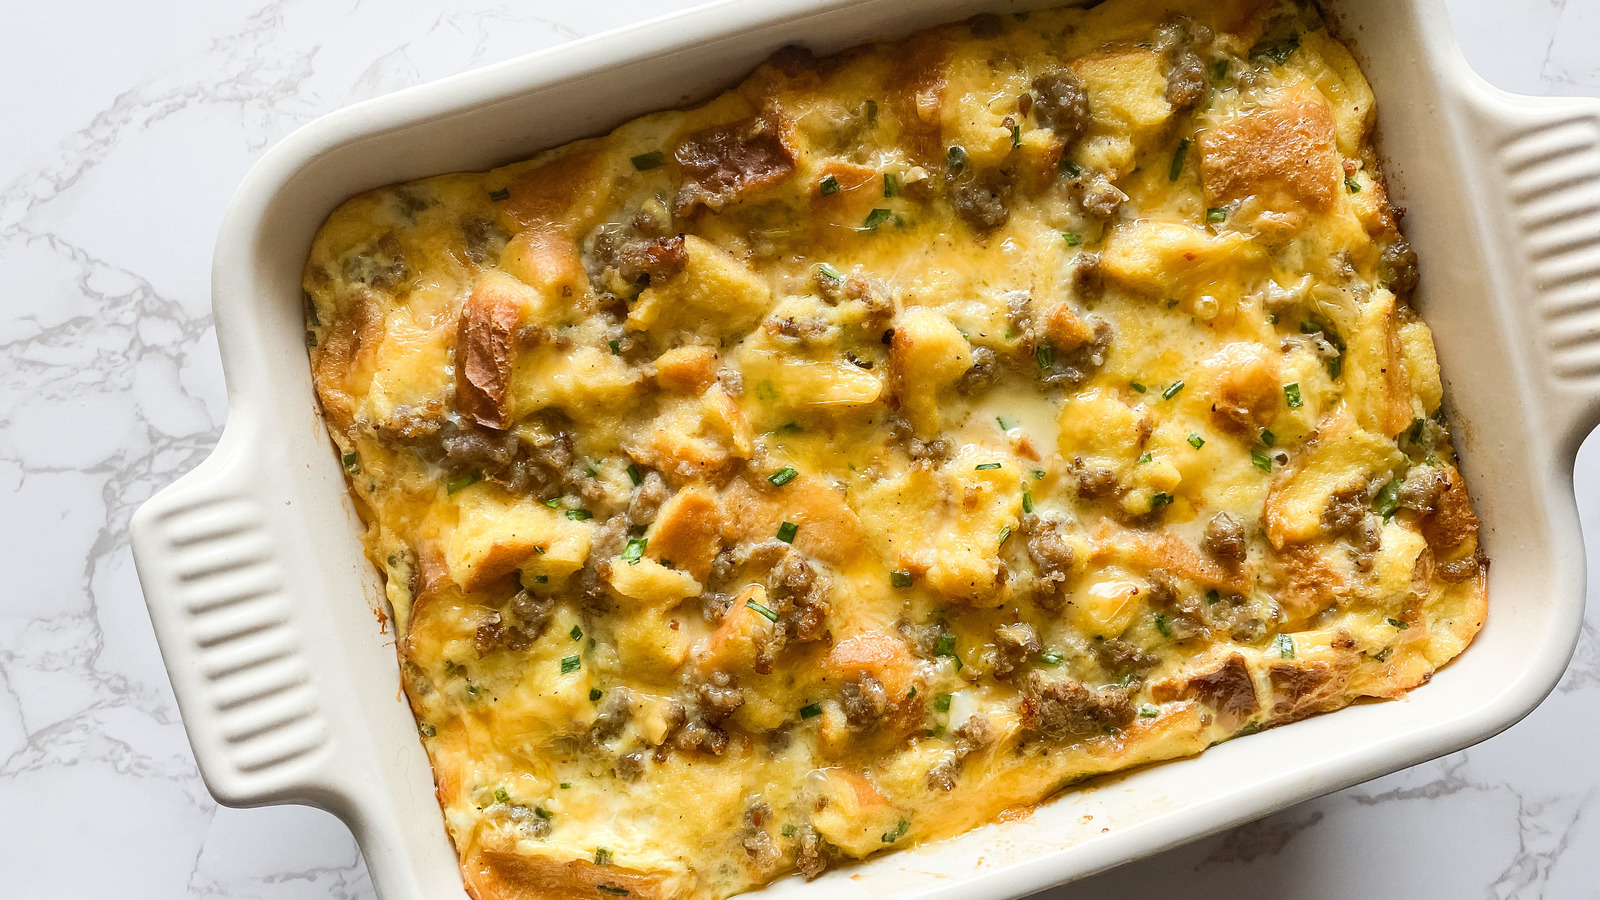 CAST IRON SAUSAGE EGG CASSEROLE - Let's Cook Some Food